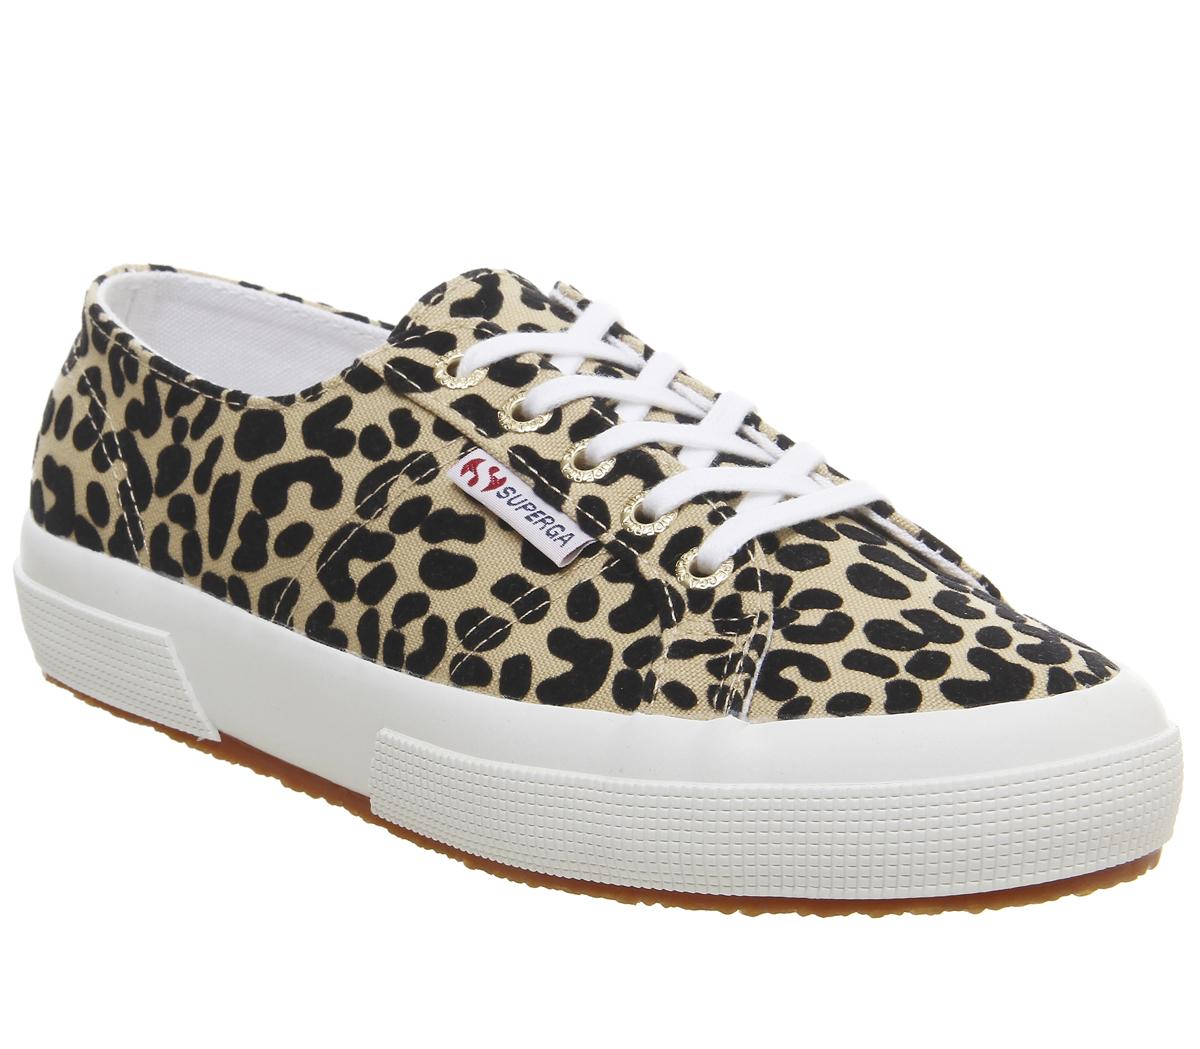 Superga 2750 Trainers Leopard - Hers 